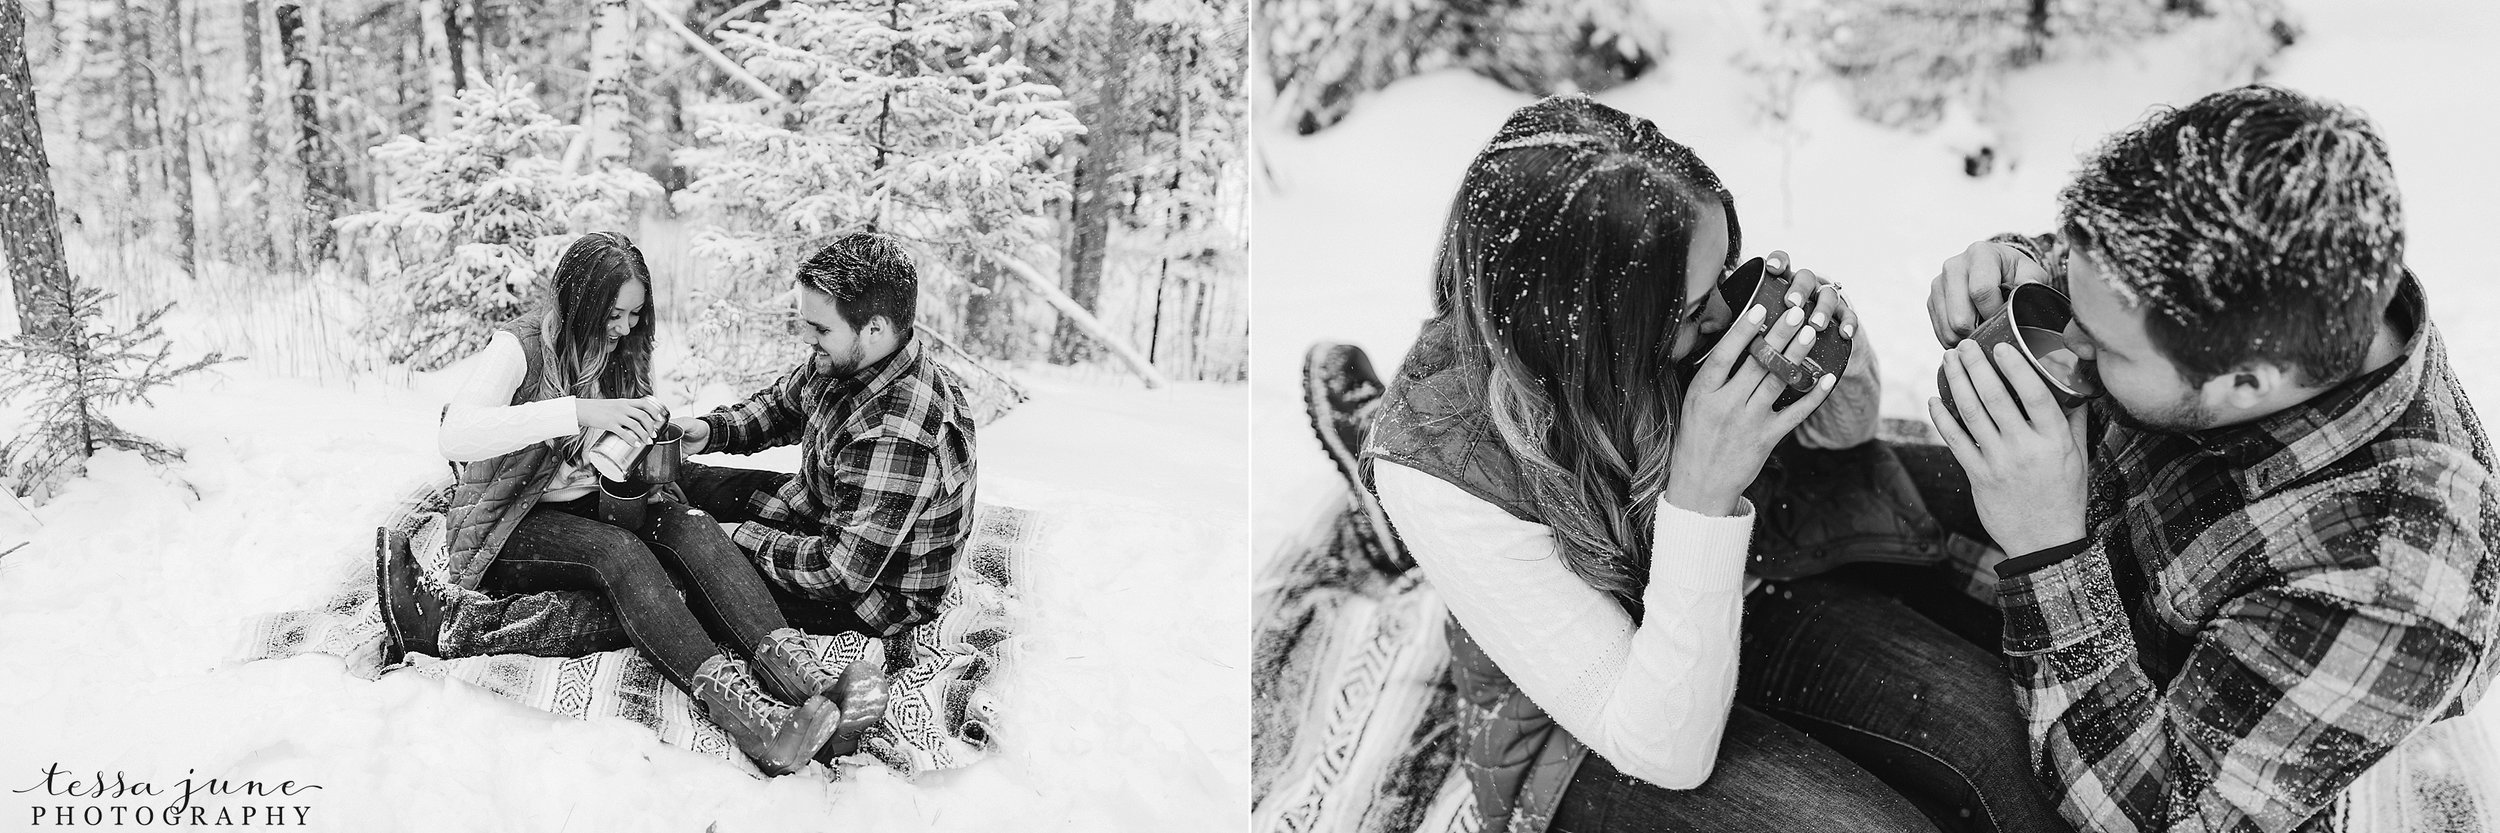 duluth-winter-engagement-forest-photos-during-snow-storm-26.jpg